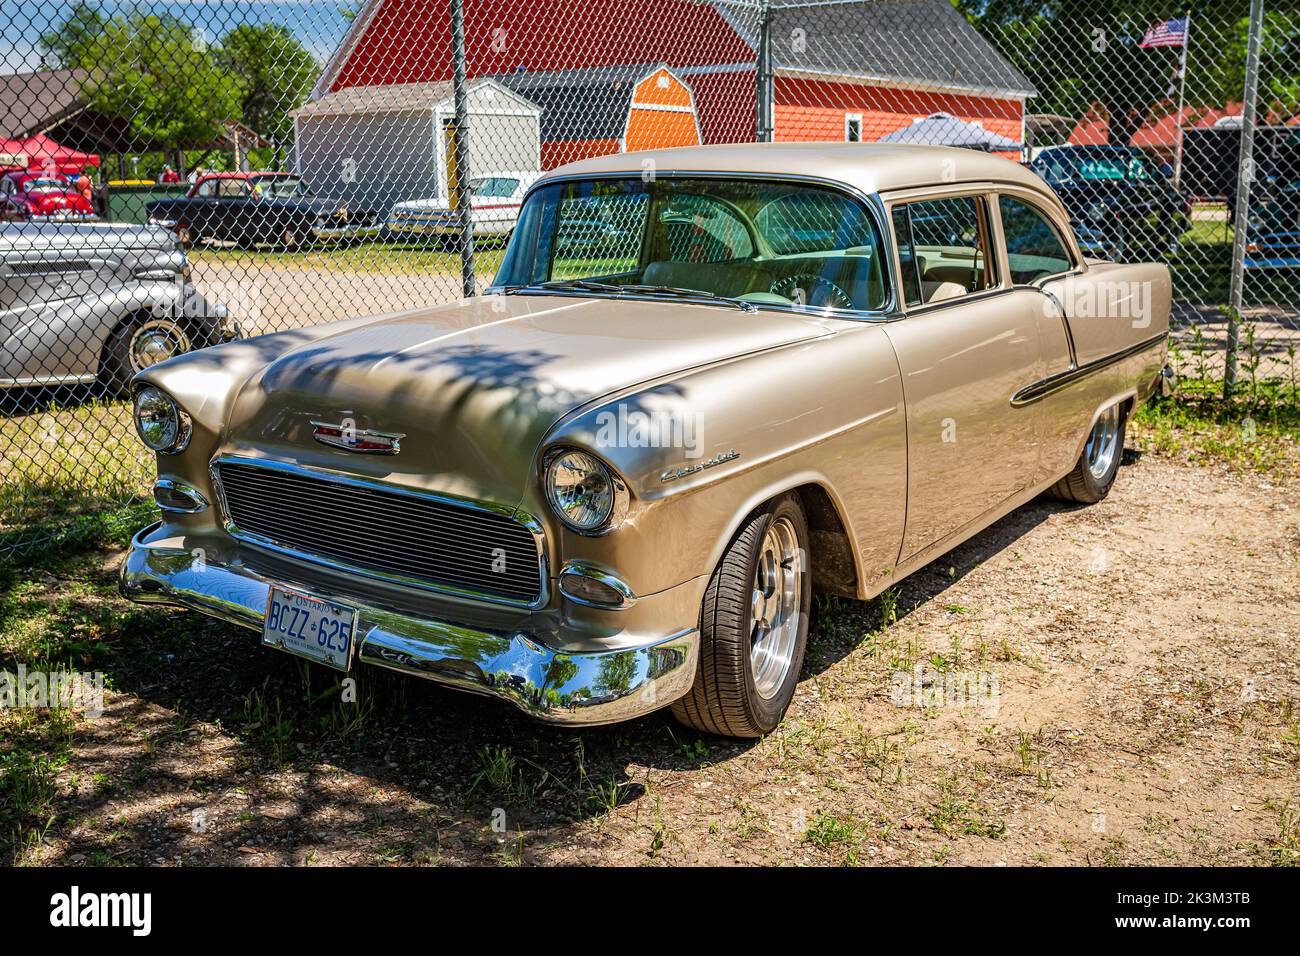 Falcon Heights, MN - June 18, 2022: High perspective front corner view of a 1955 Chevrolet 210 2 Door Sedan at a local car show. Stock Photo